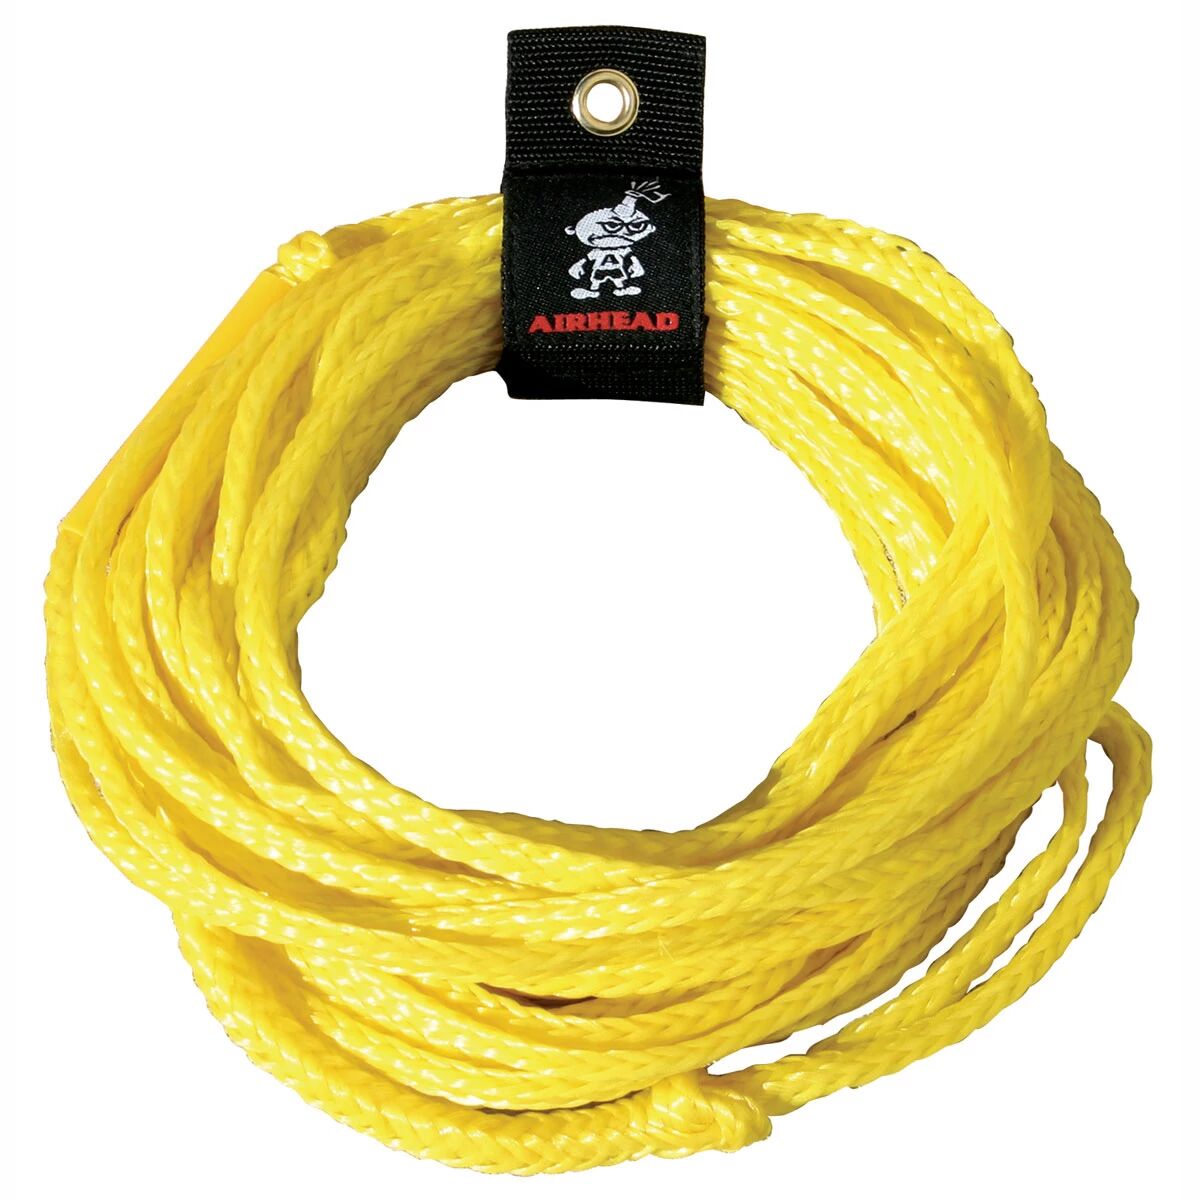 50' Tow Tube Rope